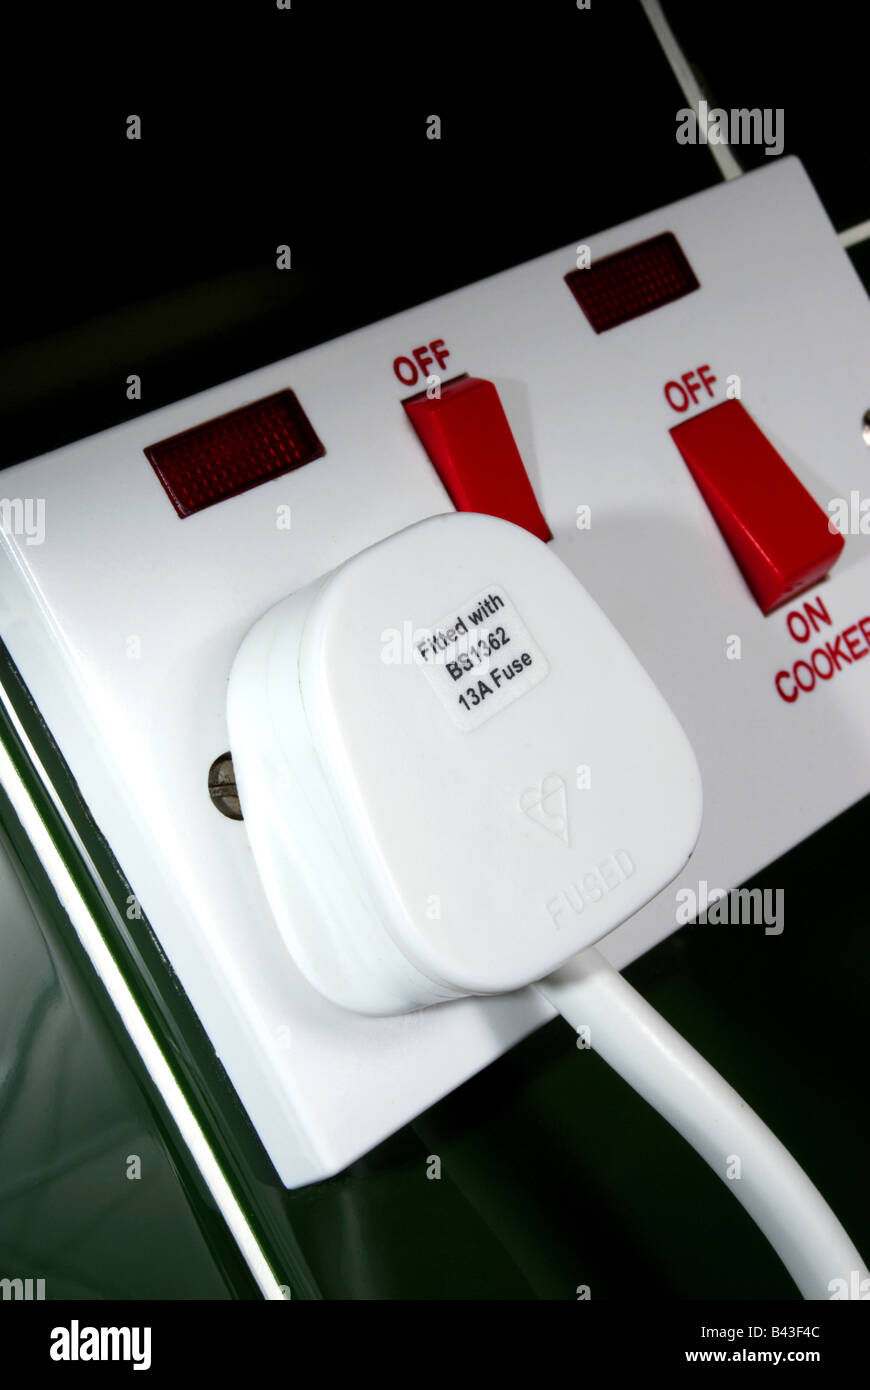 a standard plug in an electrical socket showing the on off wording Stock Photo